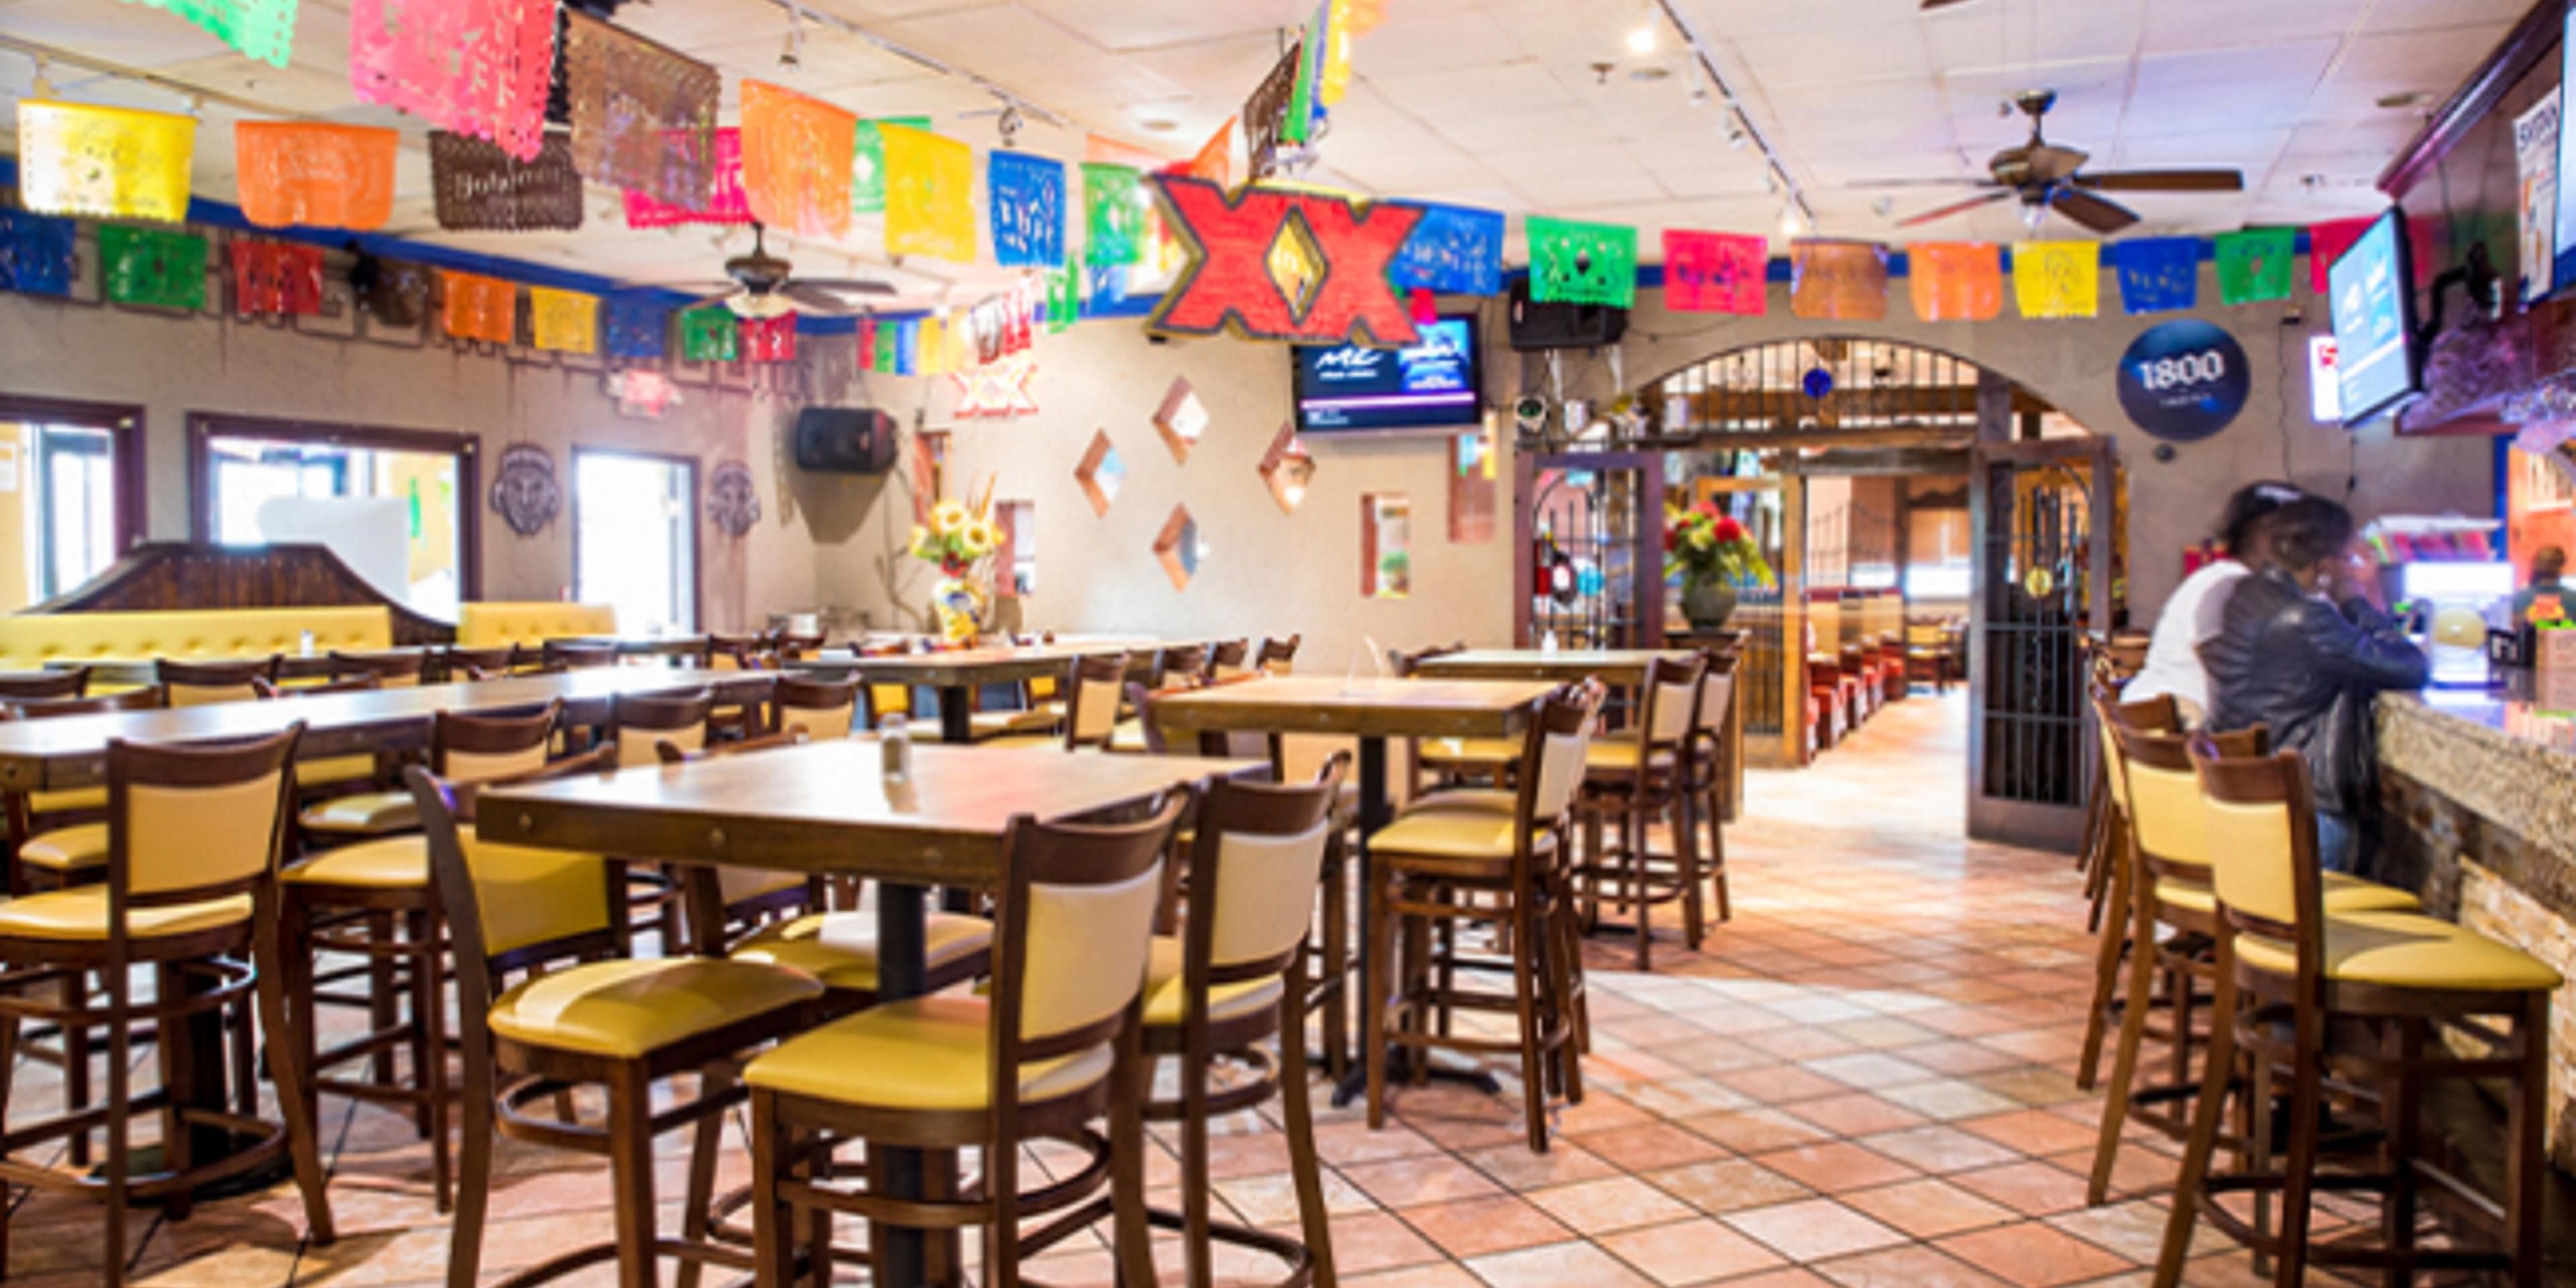 One of the best Mexican restaurants in the Atlanta area is adjacent to our hotel. Whether craving a great meal or a relaxing drink, we are right next to La Fiesta Mexican Restaurant.